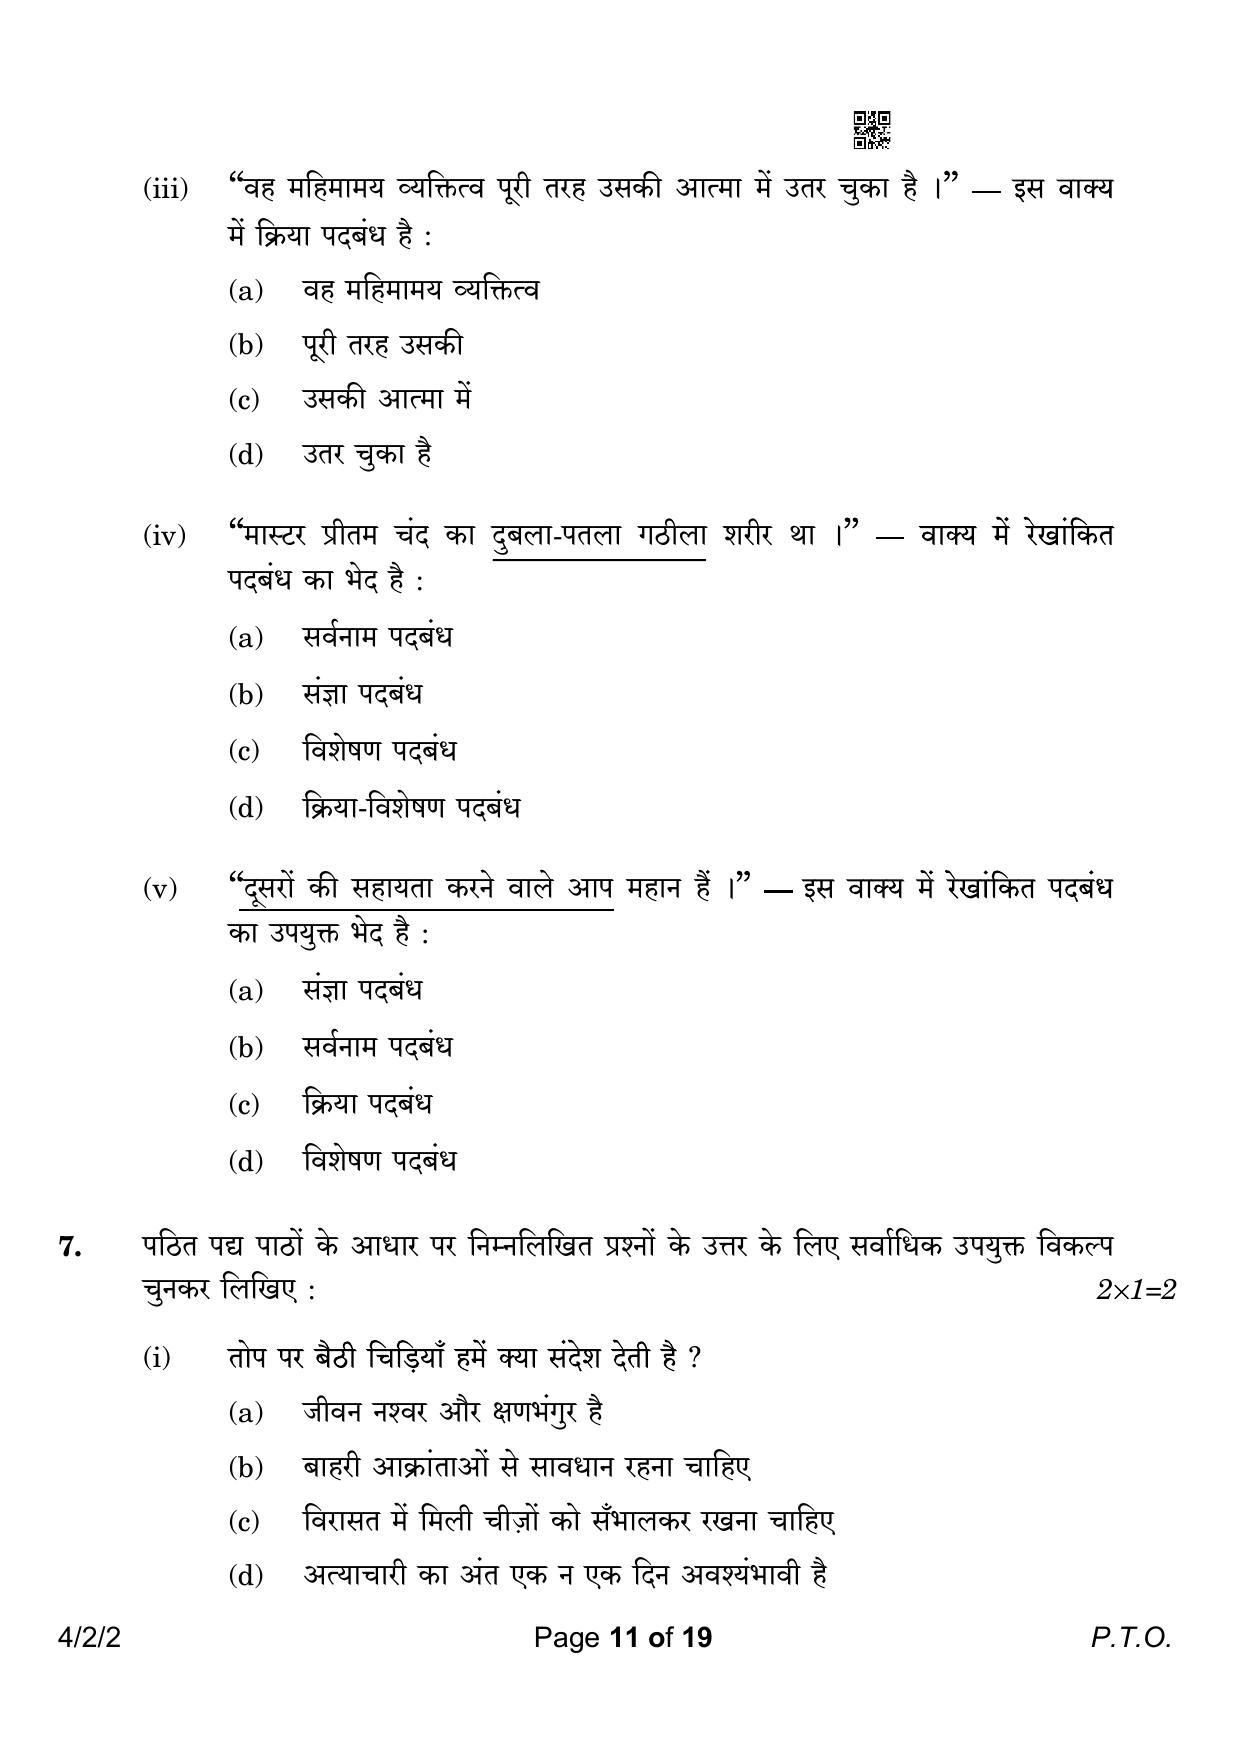 CBSE Class 10 4-2-2 Hindi B 2023 Question Paper - Page 11